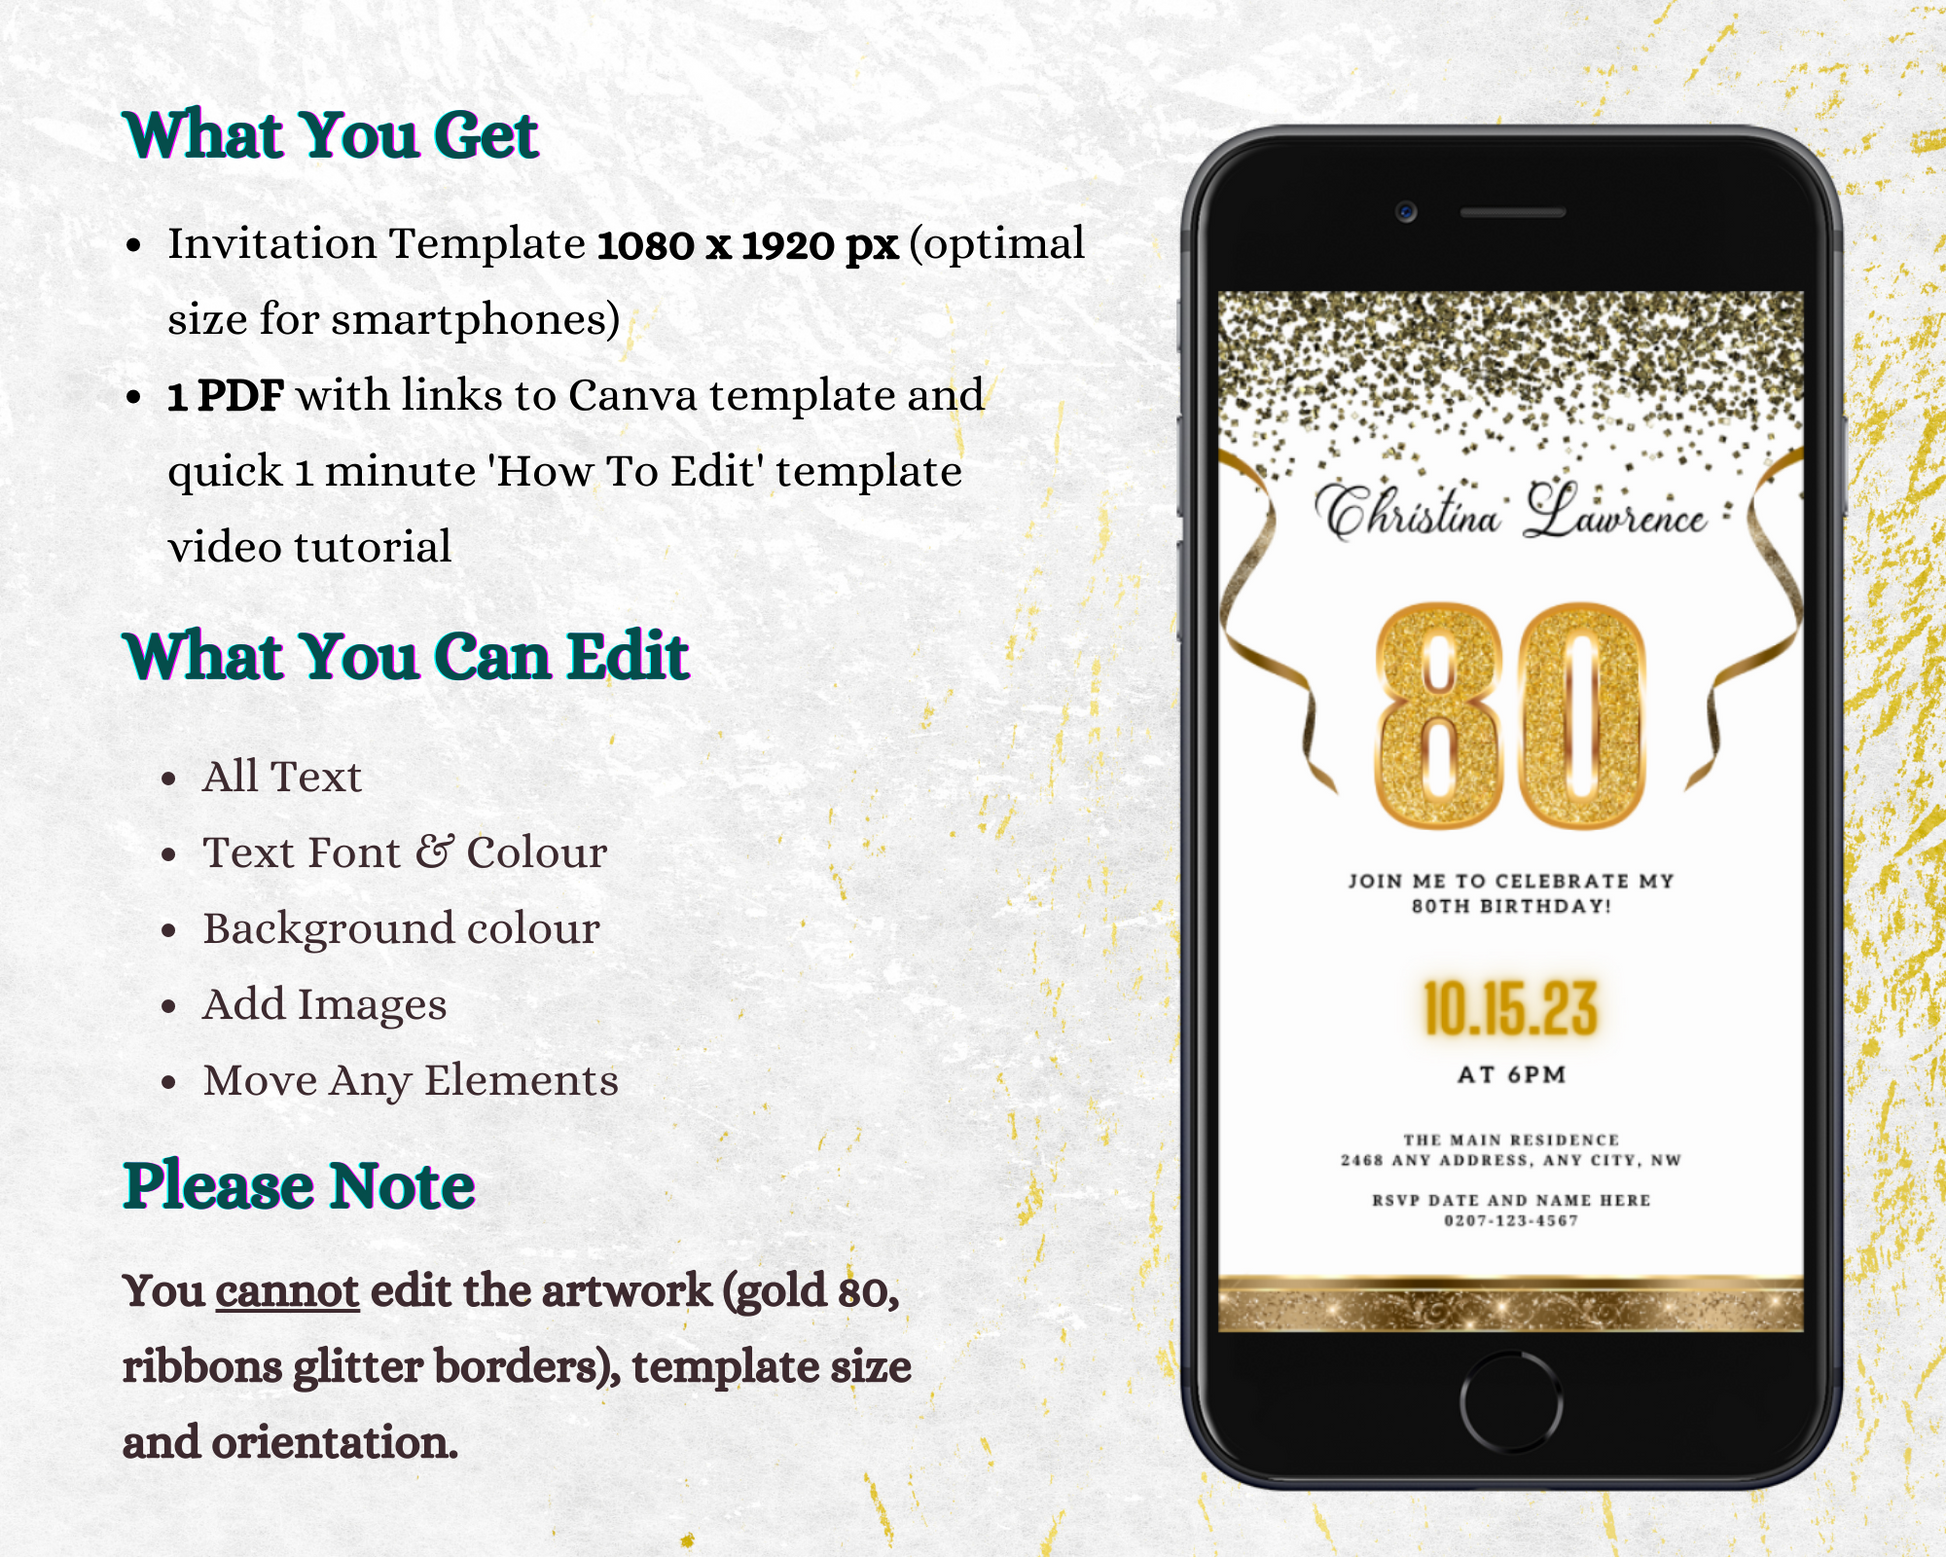 White Gold Confetti 80th Birthday Evite displayed on a smartphone, adorned with gold confetti and ribbons, showcasing customizable digital invitation features.